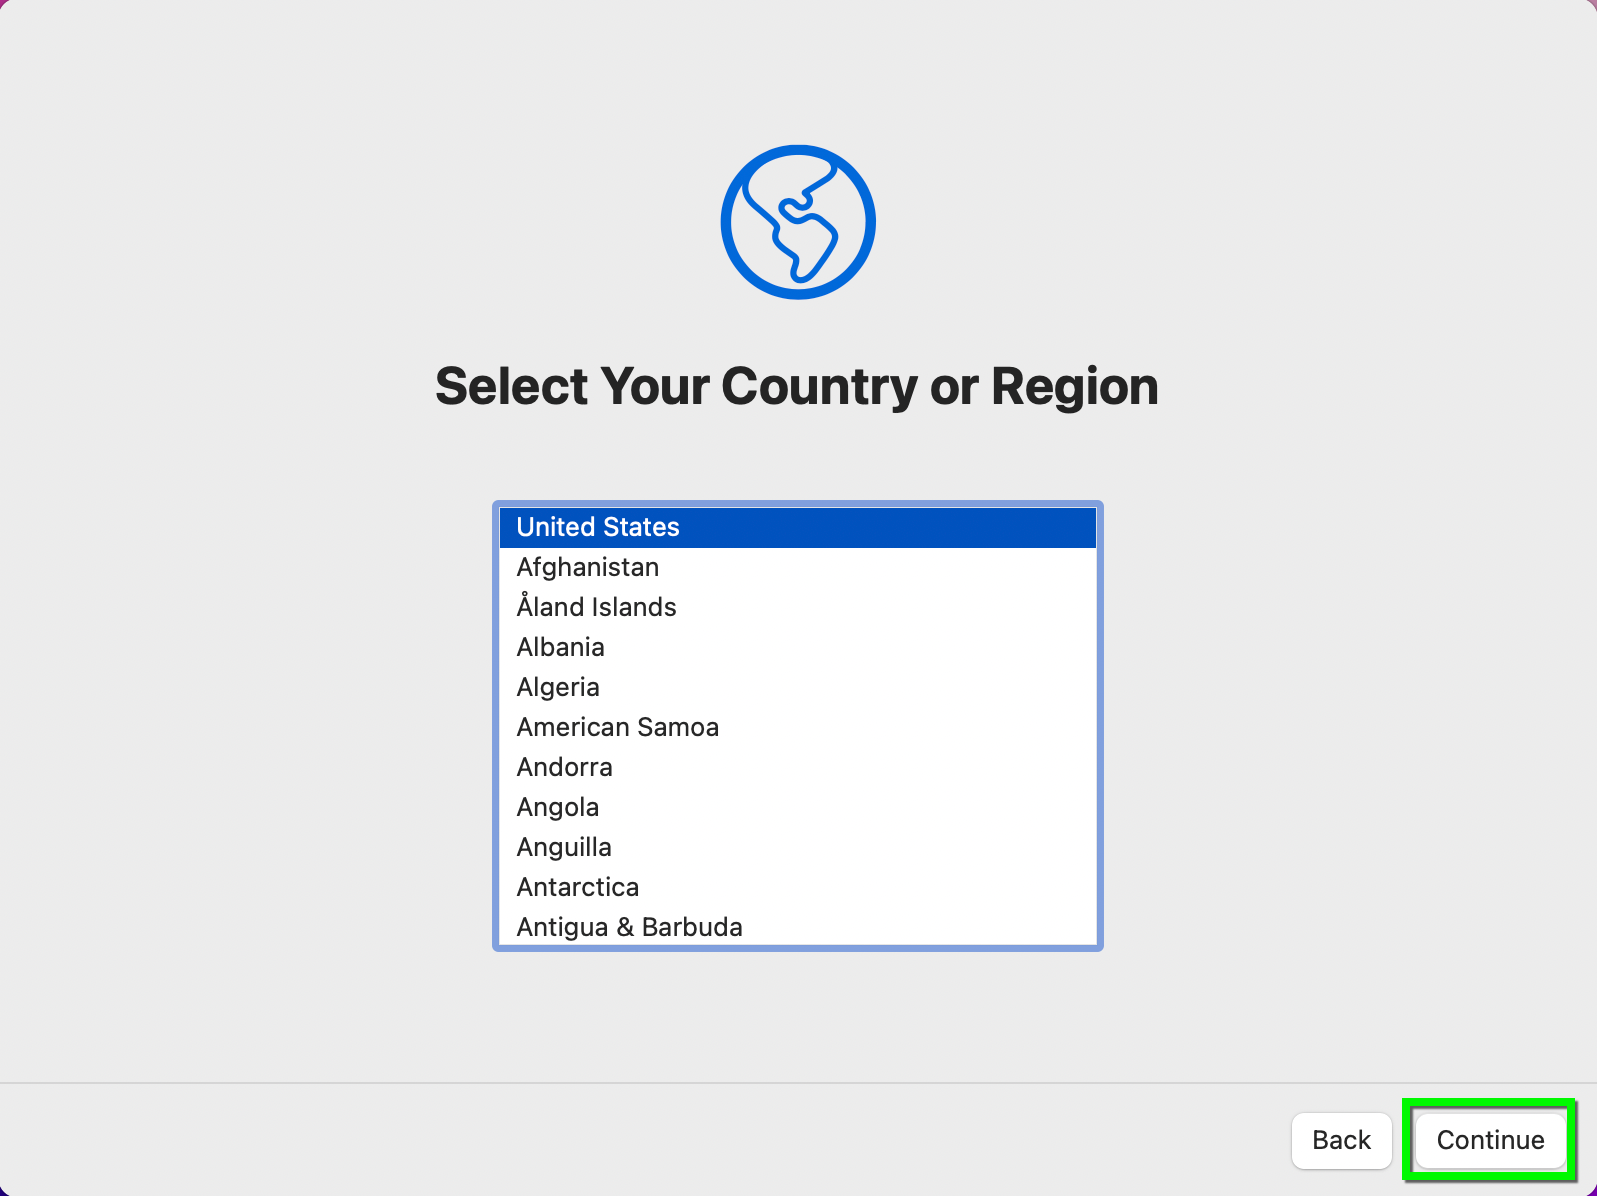 Select Your Country/Region